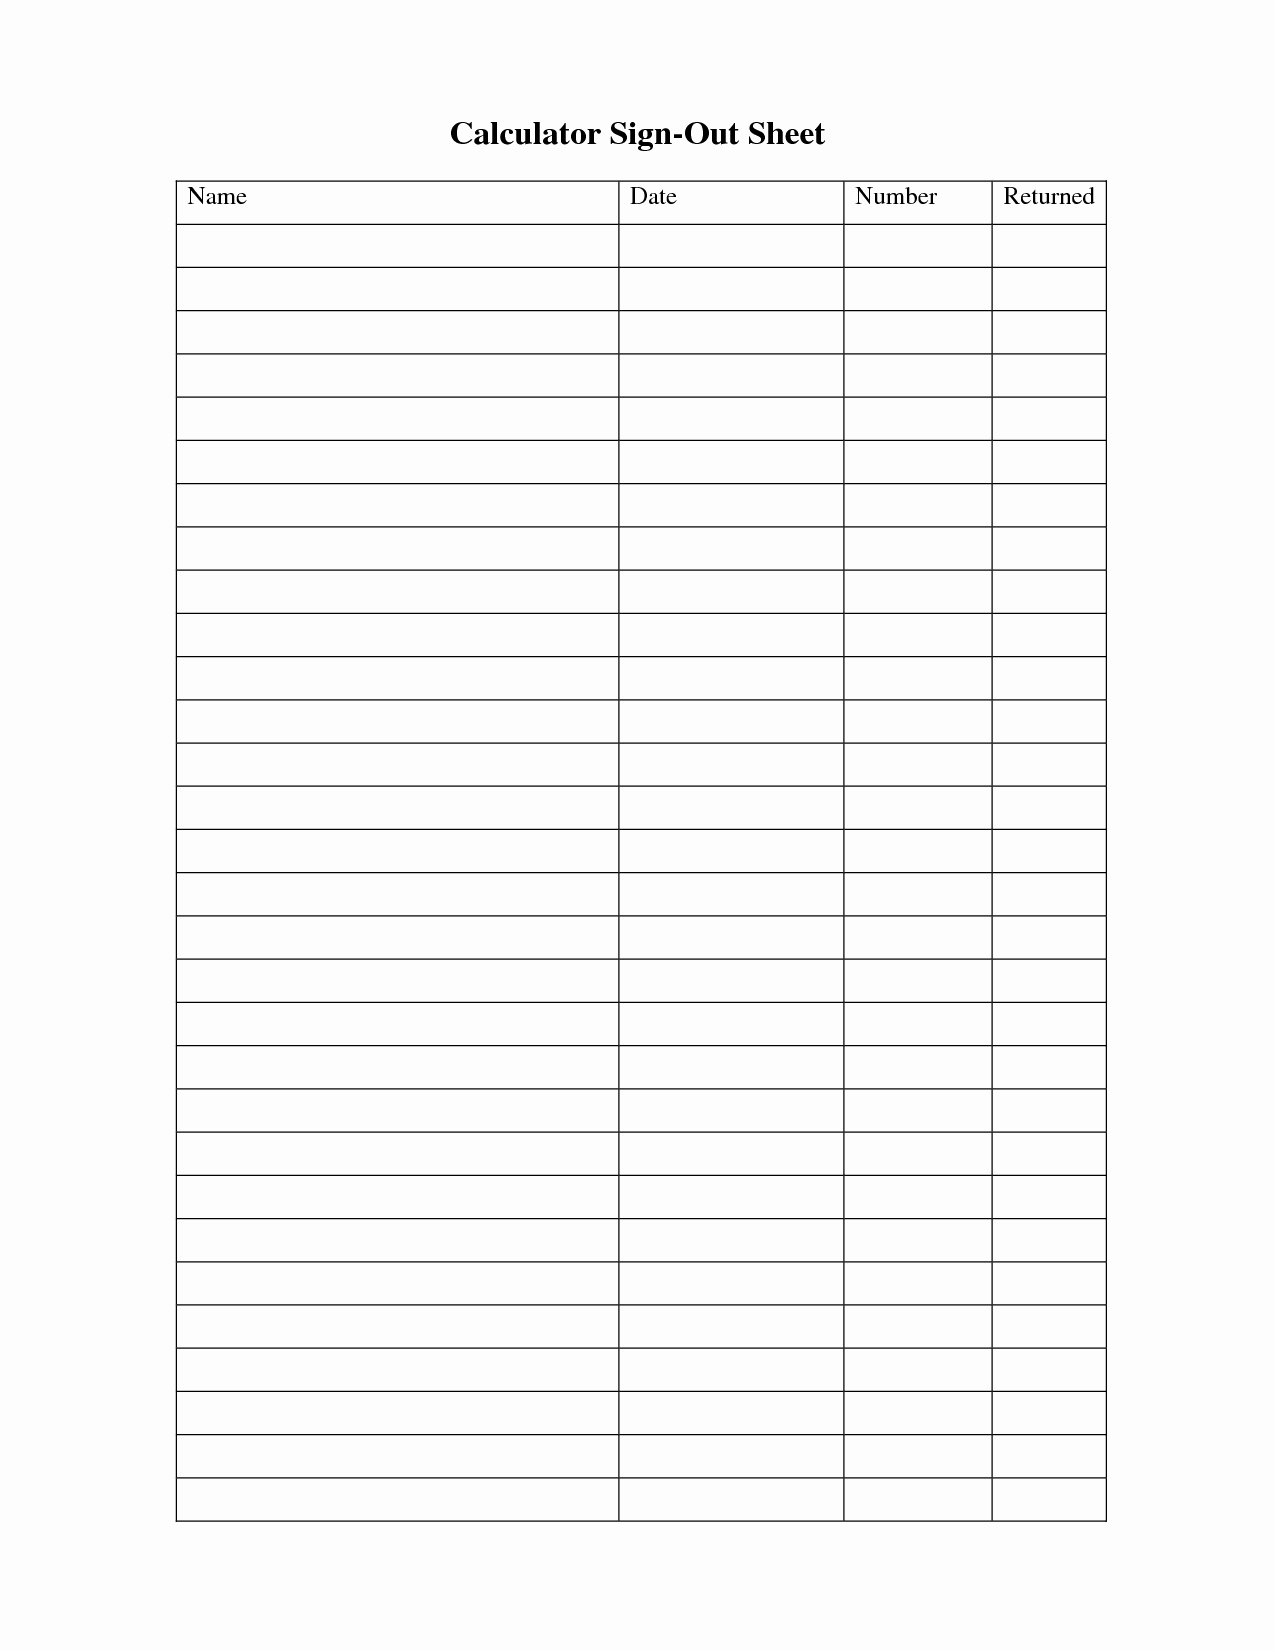 Restroom Sign Out Sheet Beautiful Best S Of Classroom Sign Out Sheet Classroom Sign Out Sheet Template Classroom Library